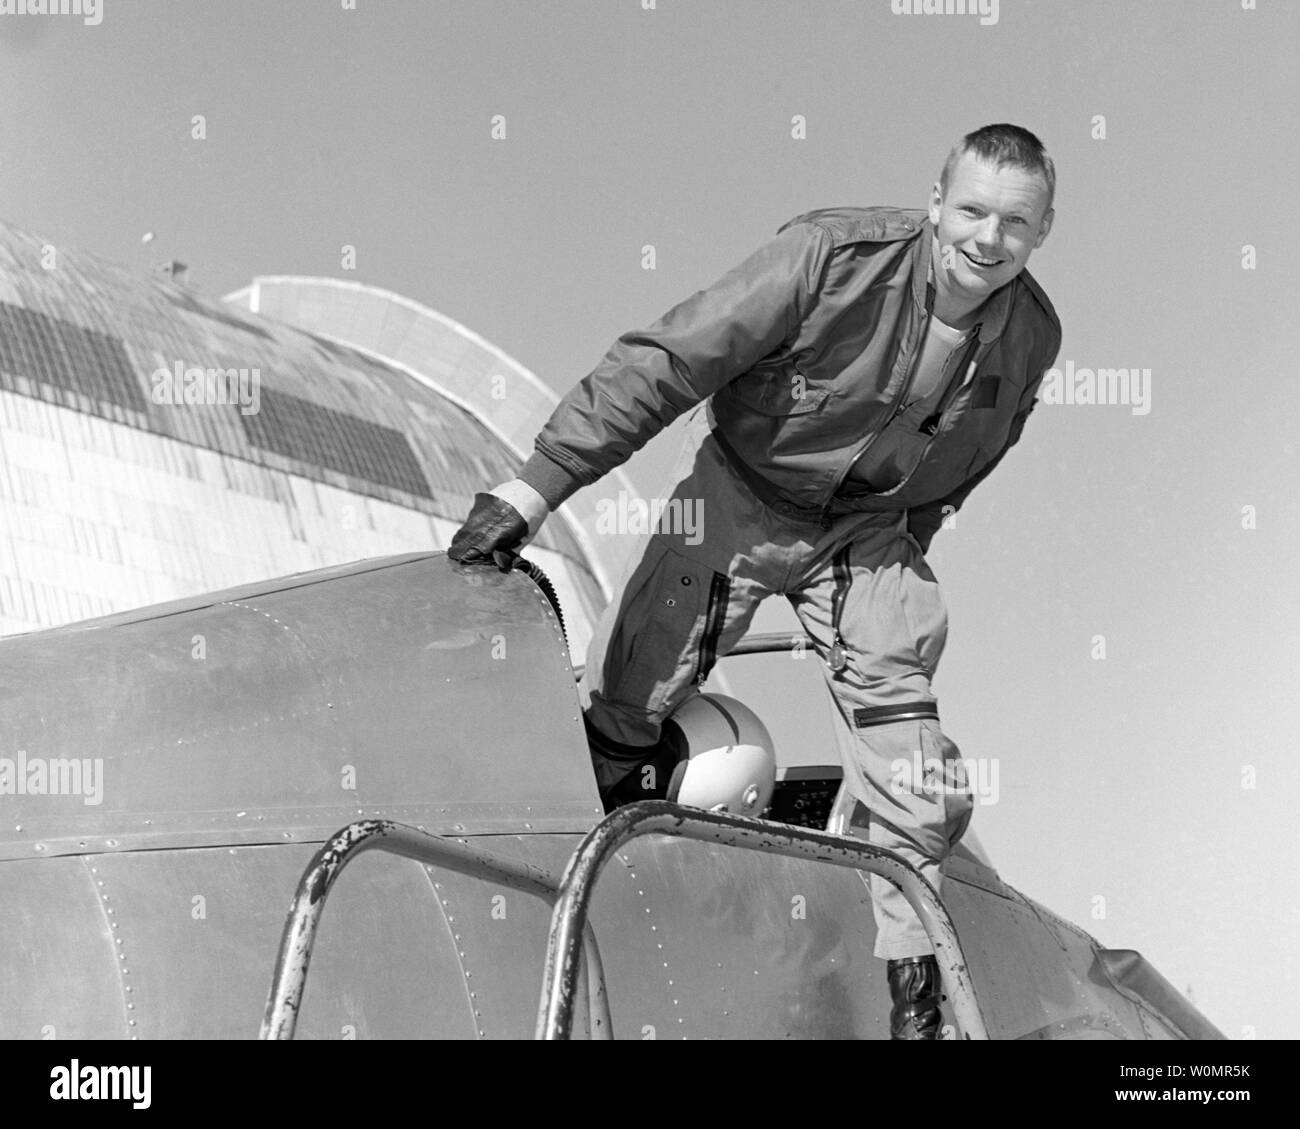 Neil Armstrong is photographed in the cockpit of the Ames Bell X-14 aircraft at NASA's Ames Research Center. Armstrong, the first man to walk on the moon, was born in Wapakoneta, Ohio, on August 5, 1930. Armstrong joined the National Advisory Committee for Aeronautics (NACA) in 1955. Over the next 17 years, he was an engineer, test pilot, astronaut and administrator for NACA and its successor agency, the National Aeronautics and Space Administration (NASA). He was assigned as command pilot for the Gemini 8 mission, performing the first successful docking of two vehicles in space. As spacecraft Stock Photo